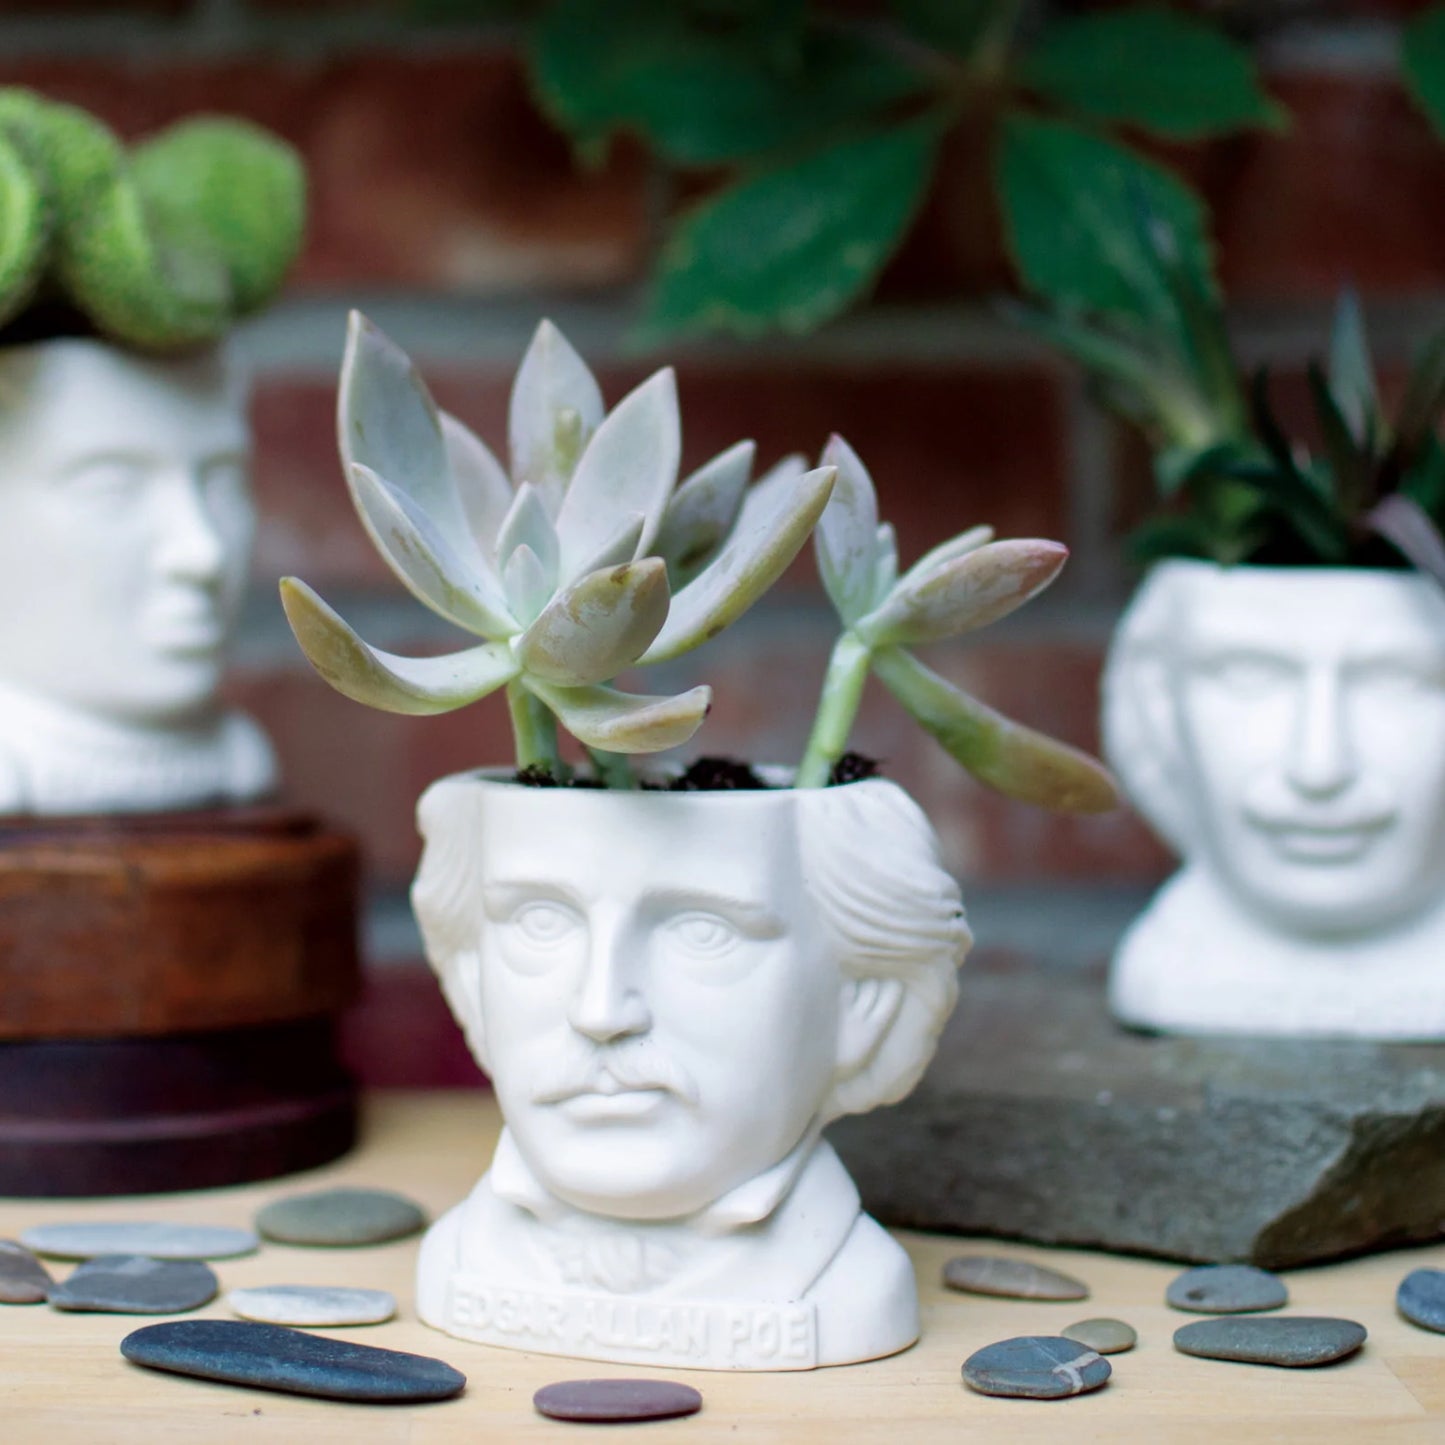 Edgar Allan Poe Small Ceramic Planter from The Unemployed Philosophers Guild